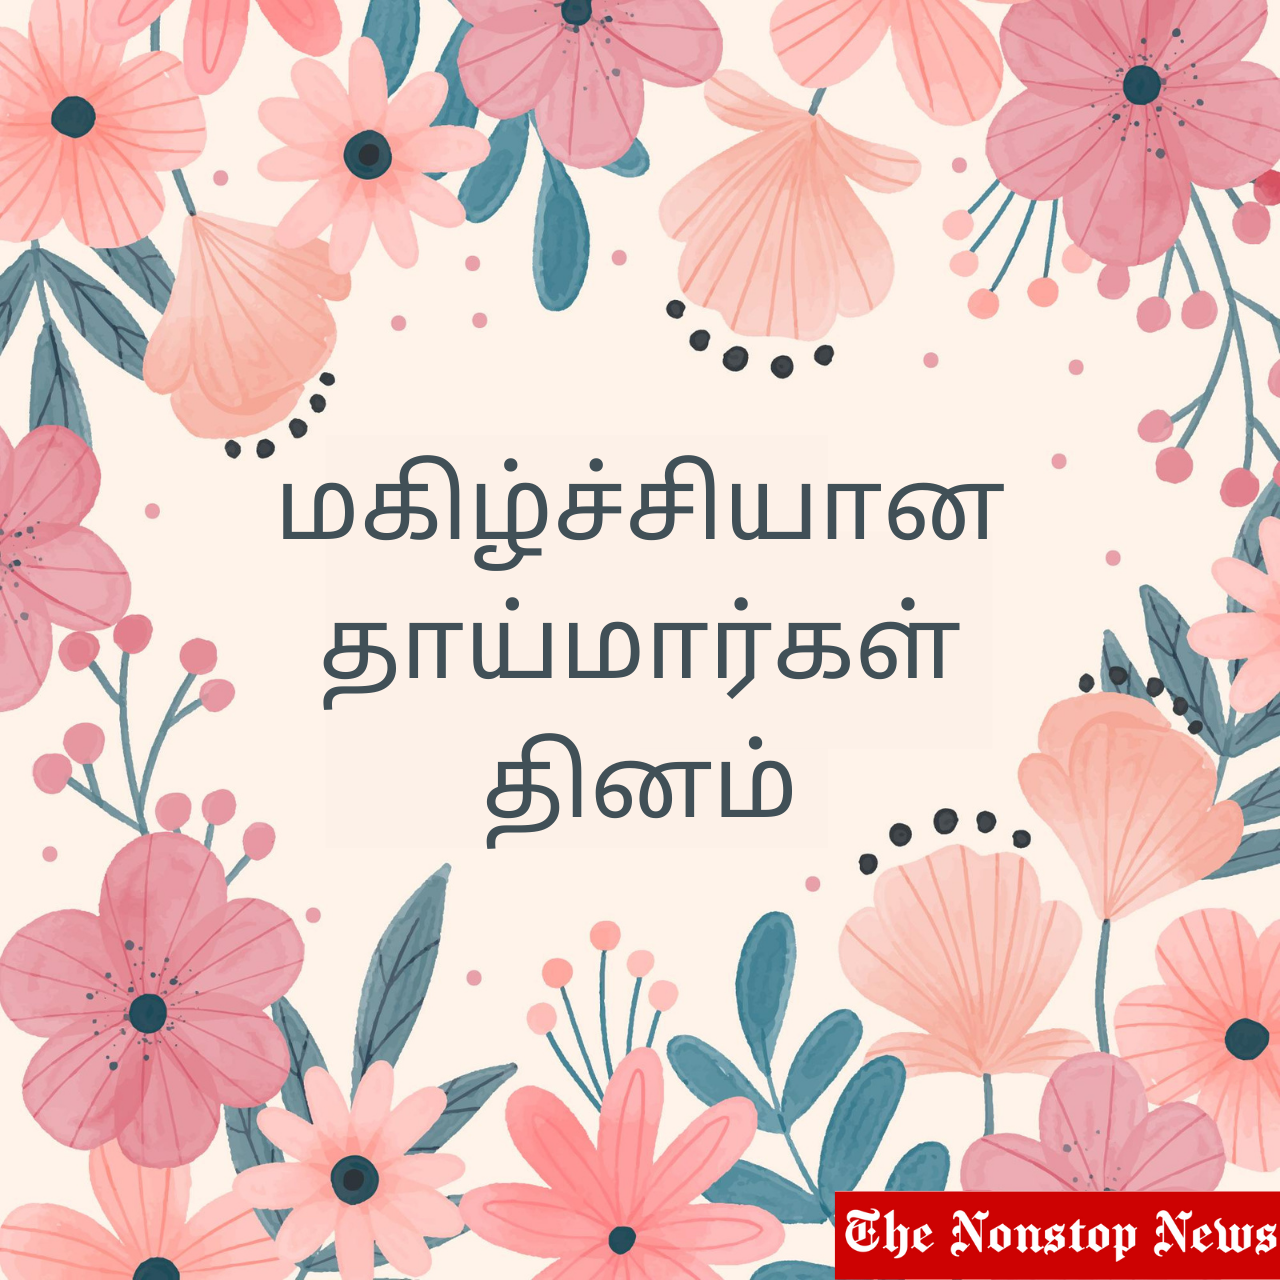 Mother's Day 2021 Wishes in Tamil and Telugu, Images (Photos), Greetings, Messages, and Quotes to share with Mom